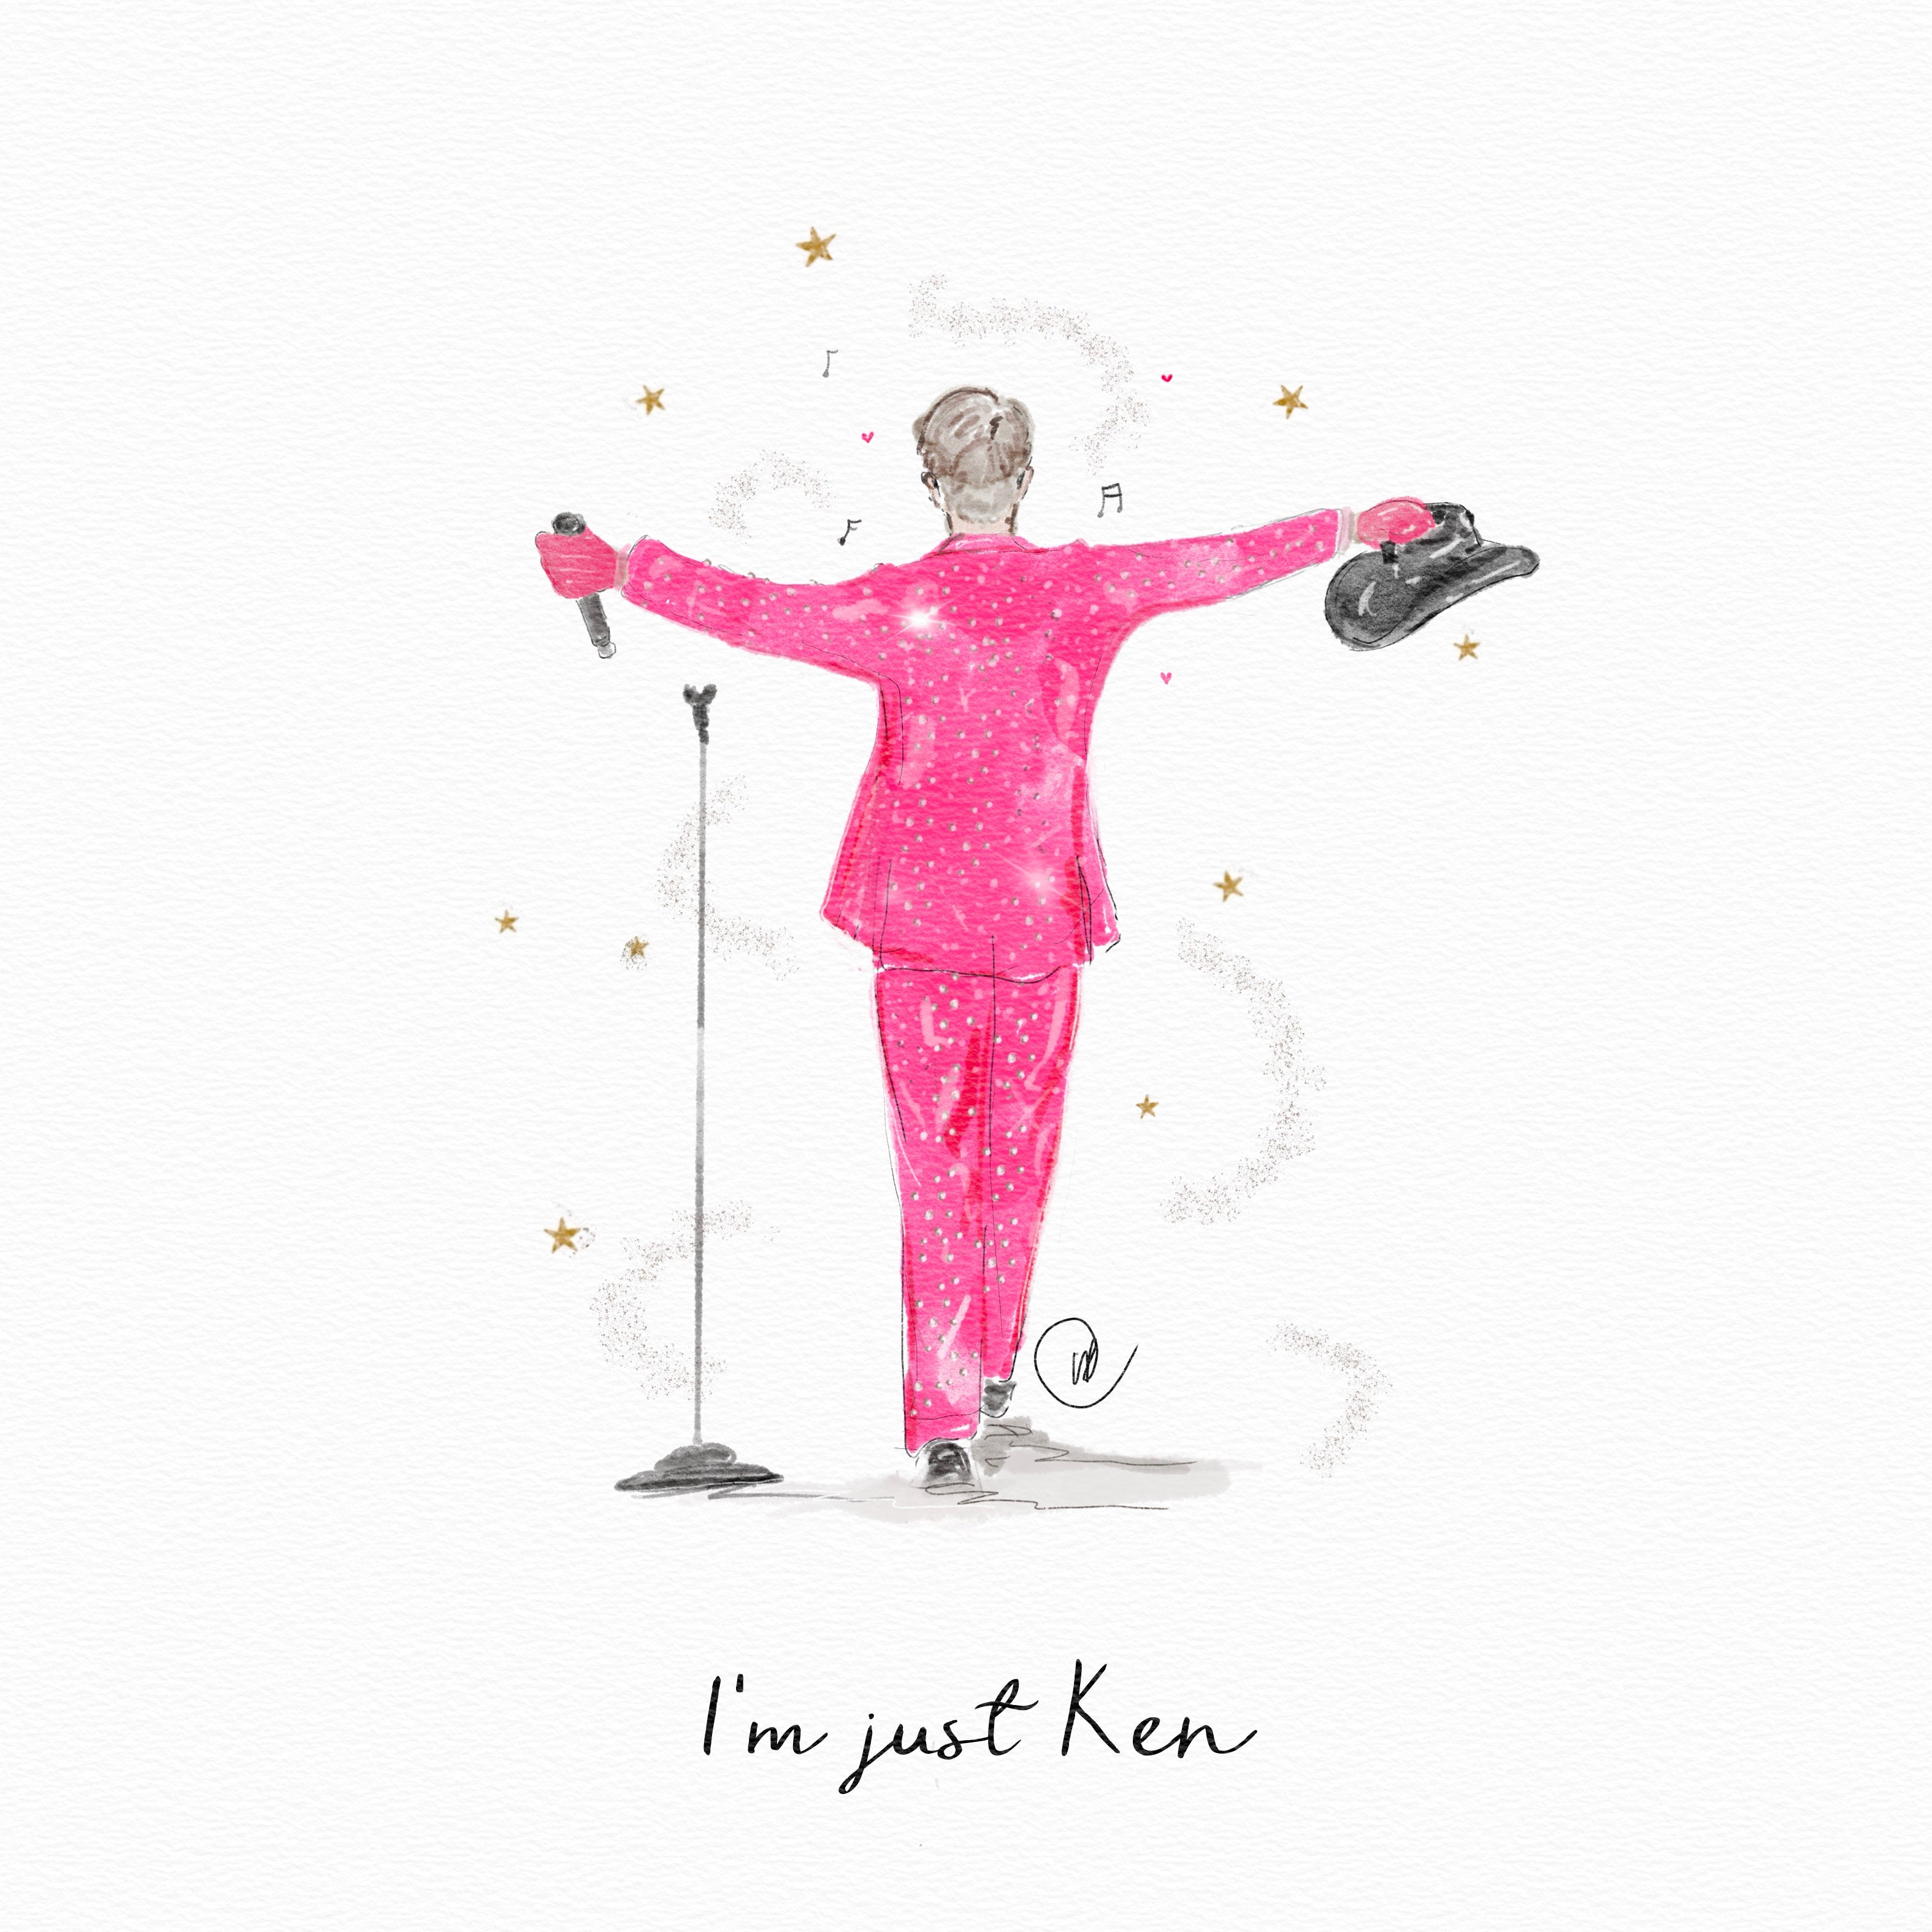 I'm just Ken Ryan Gosling Oscars print – Lucy Claire Illustration